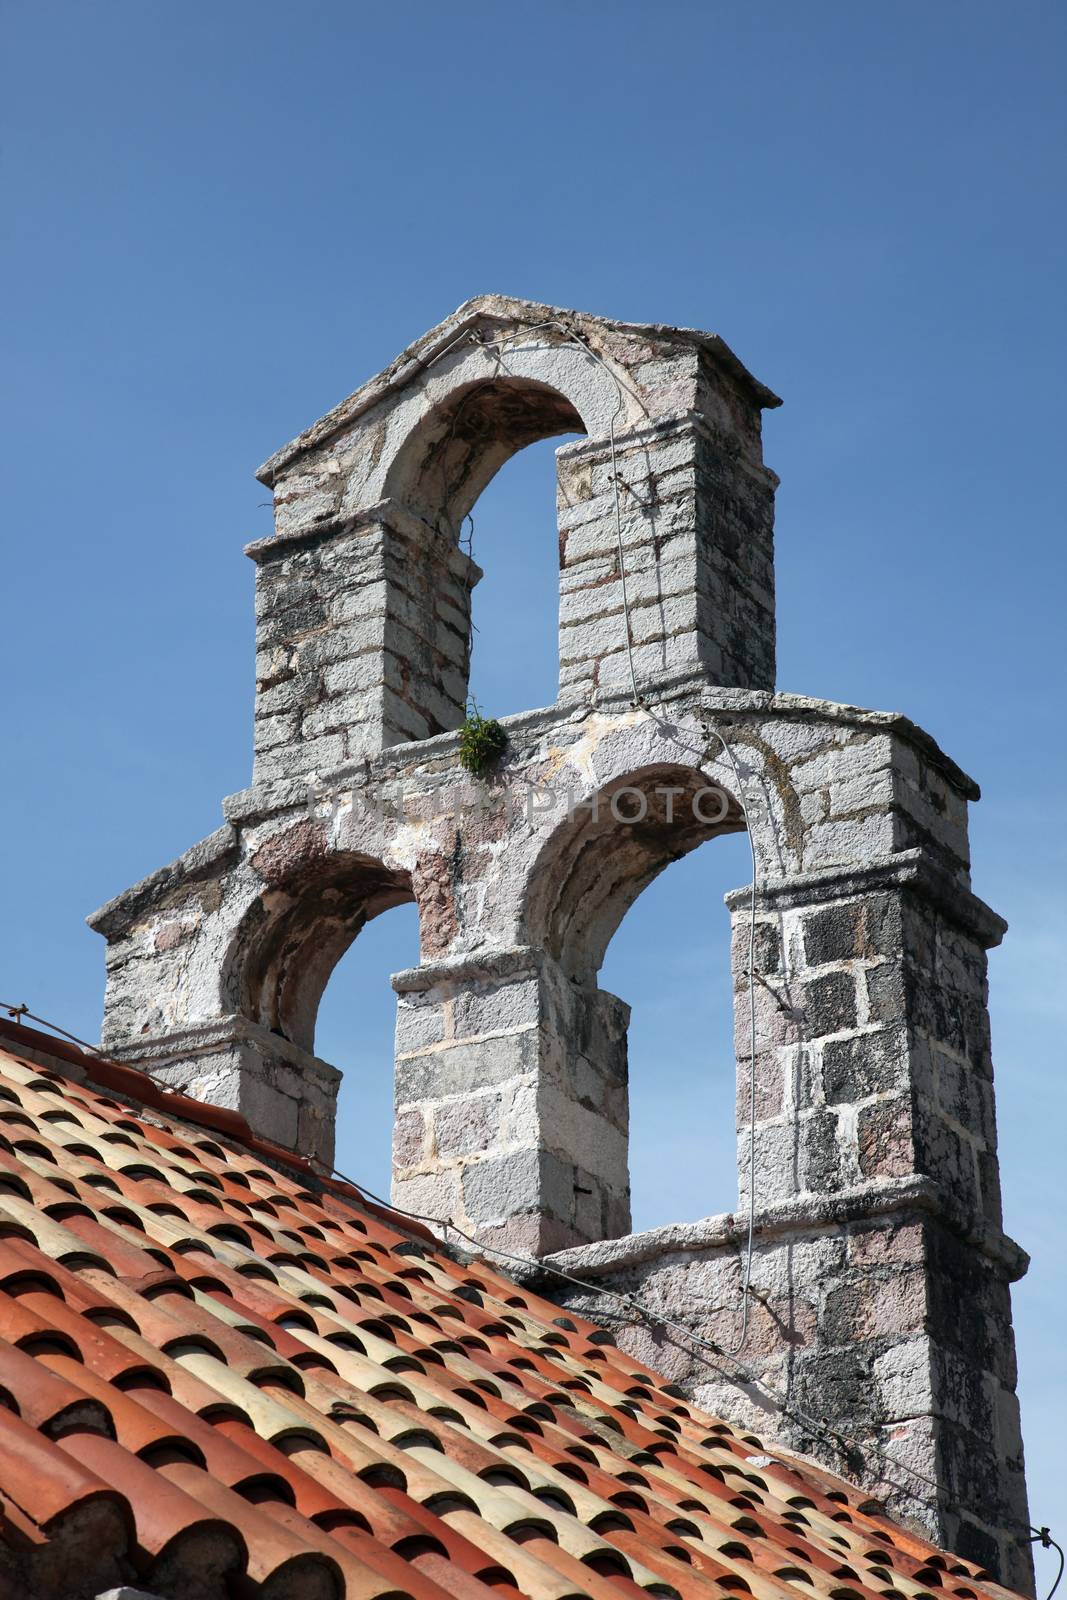 The bell tower of the church of Saint Mary in Punta, Budva, Montenegro